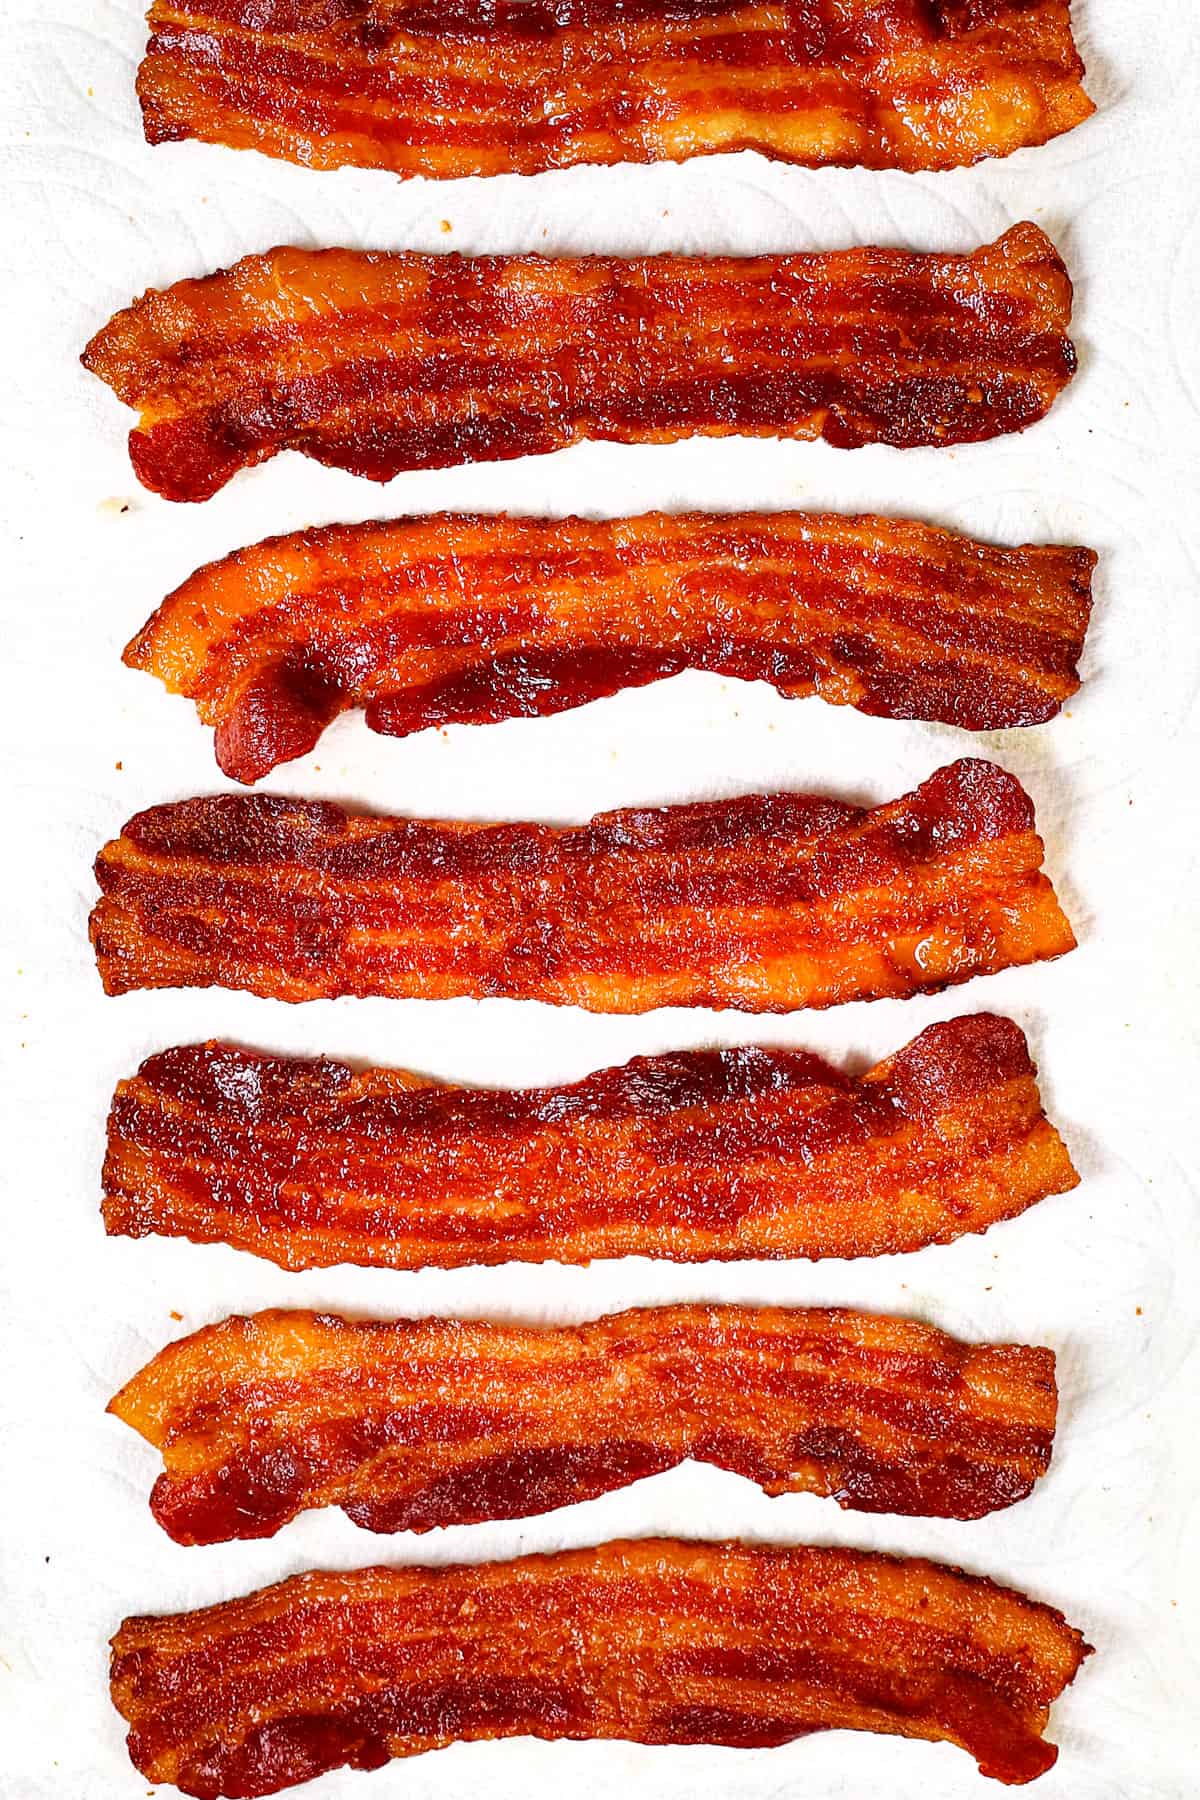 showing how to cook bacon in the oven by draining on paper towels 